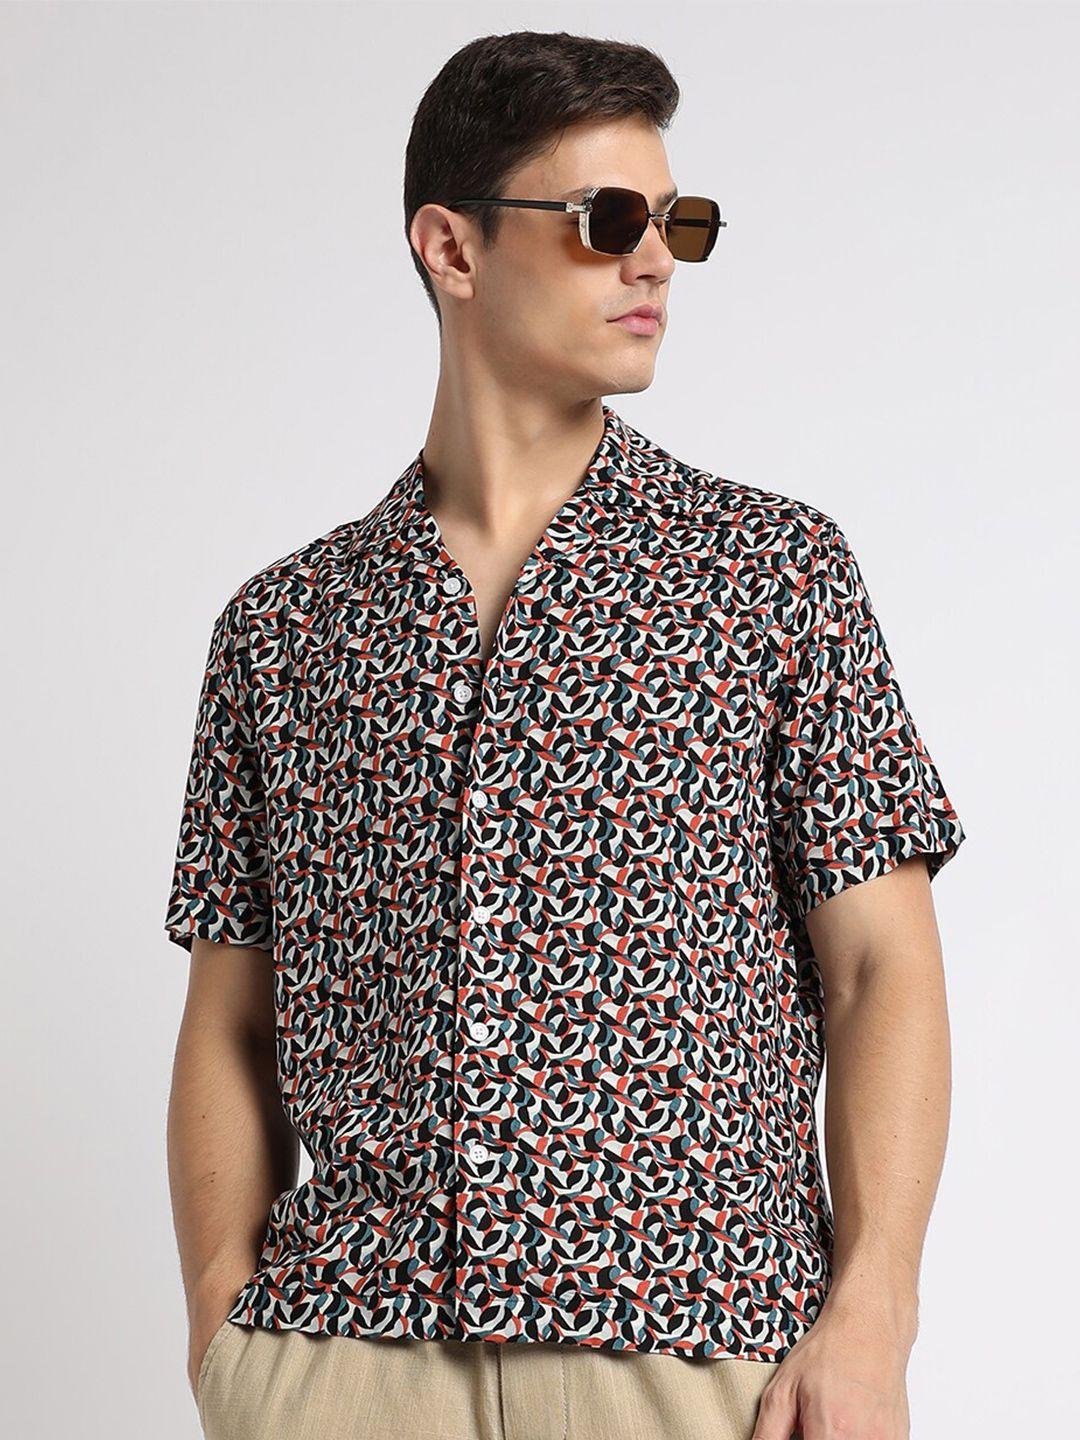 dennis lingo relaxed floral printed casual shirt